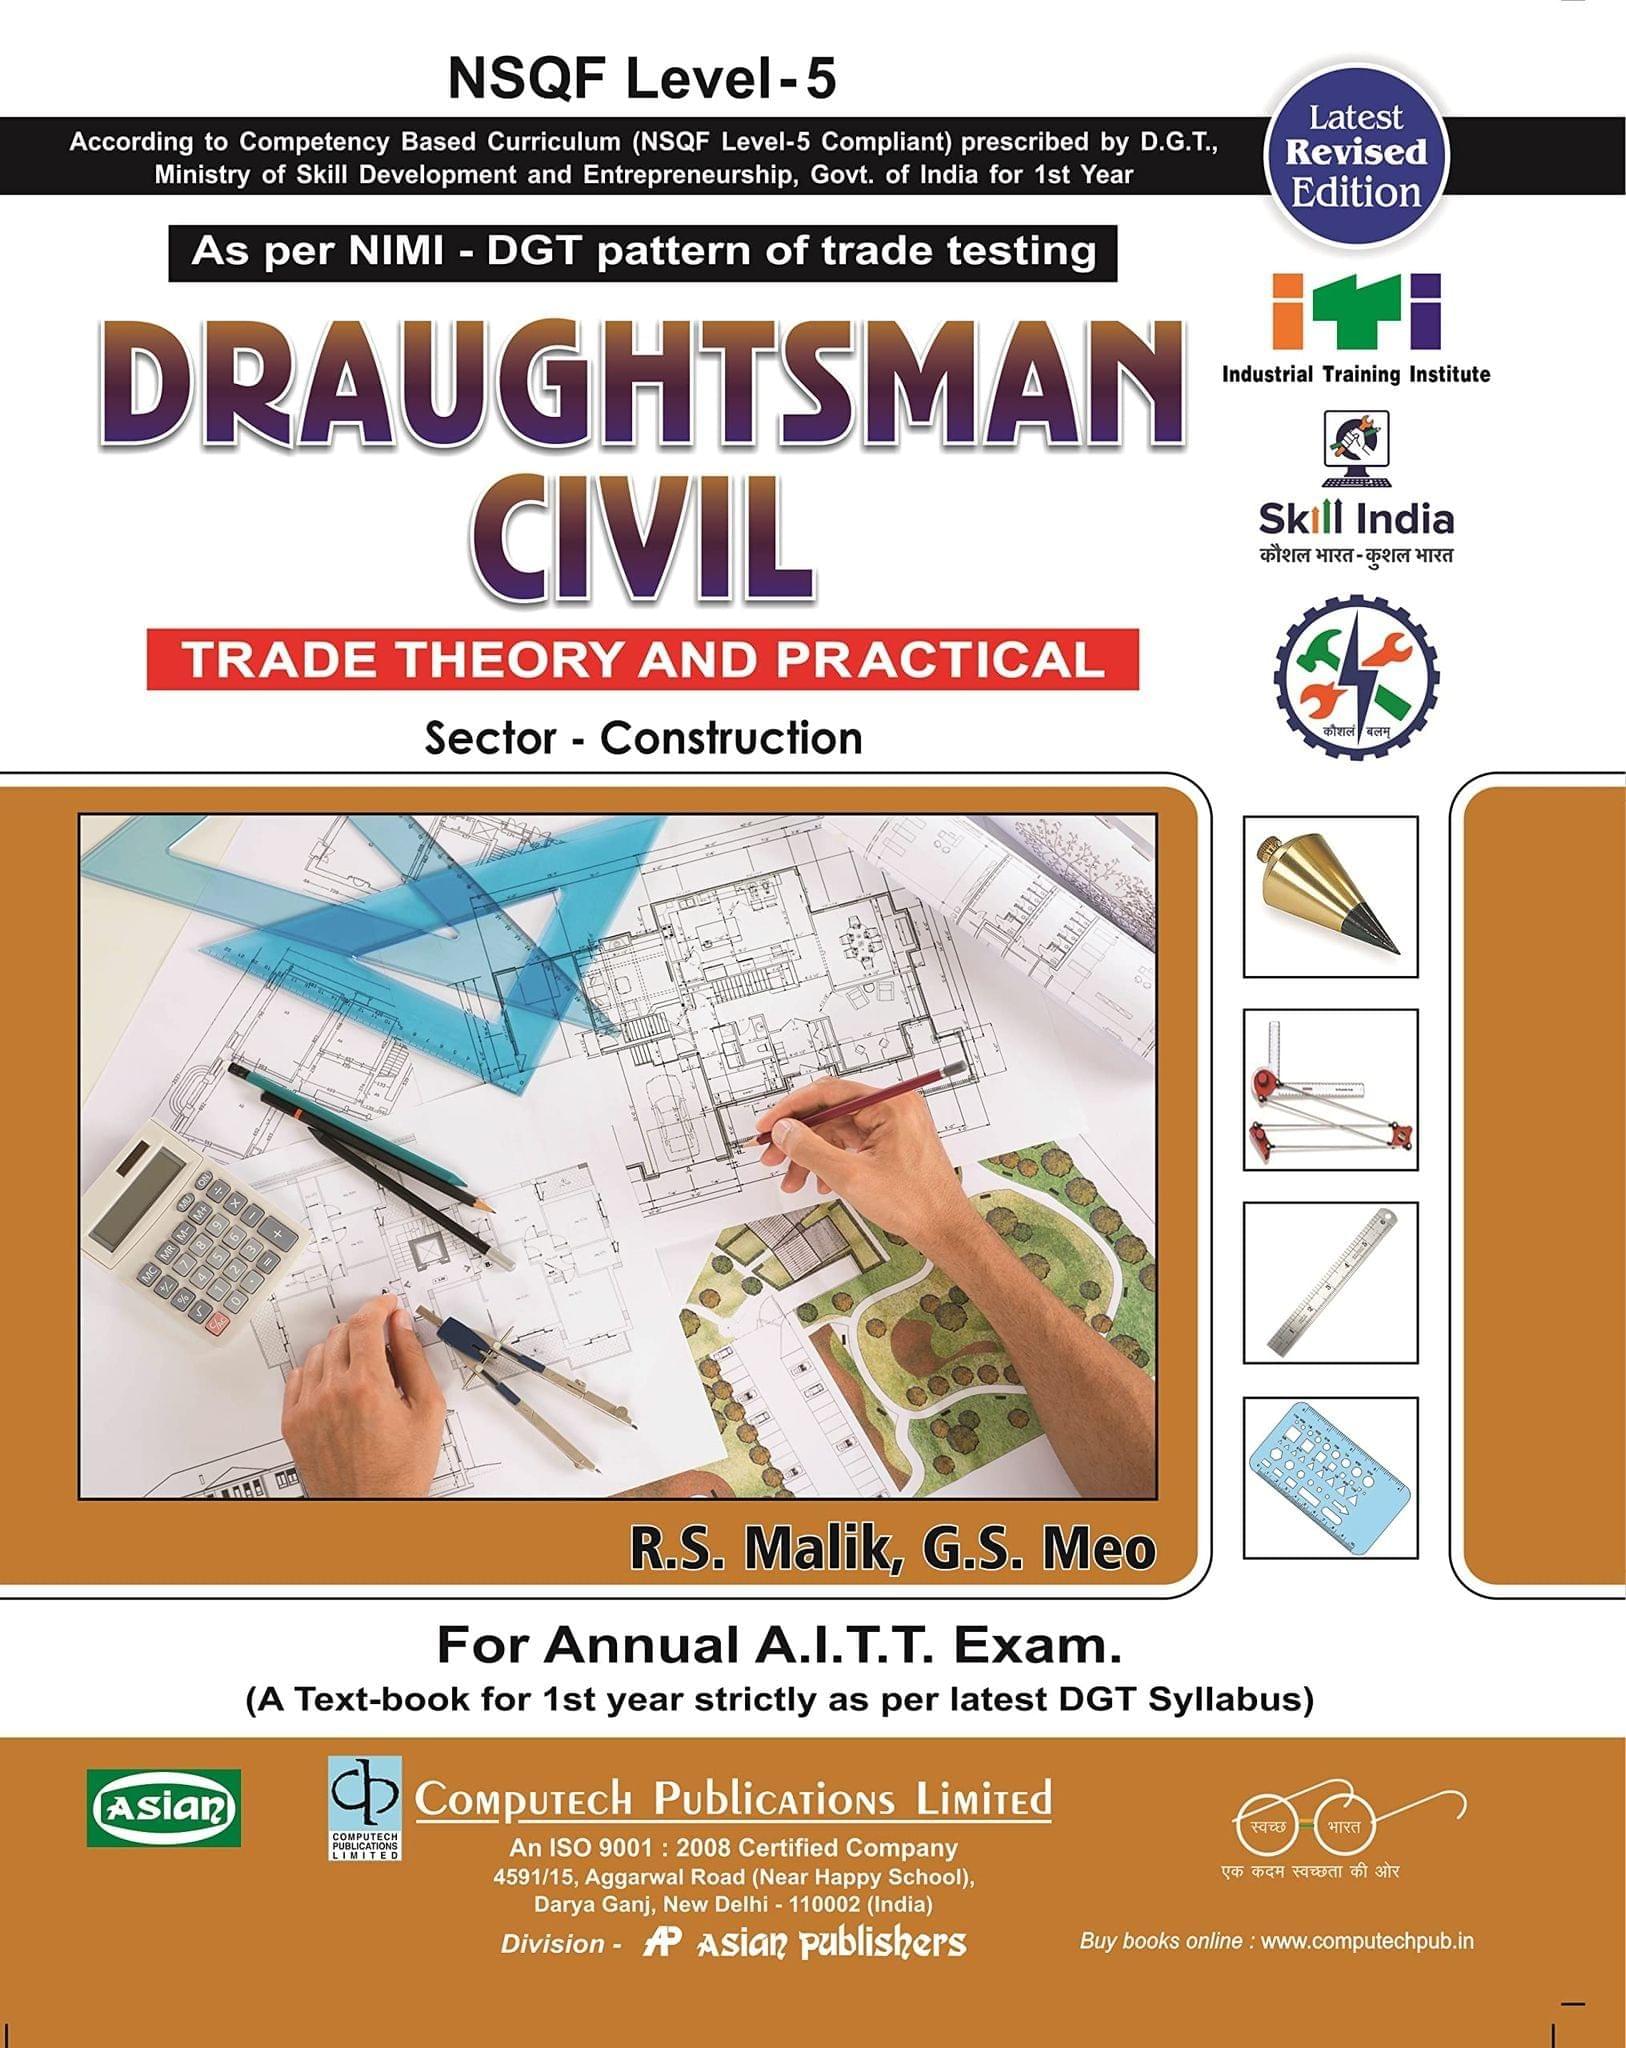 D-MAN CIVIL TH. & PRACT. (WITH SOL. ASST. NSQF-5 SYLL.) FOR 1ST YEAR [Paperback] R.S. Malik and G.S. Meo